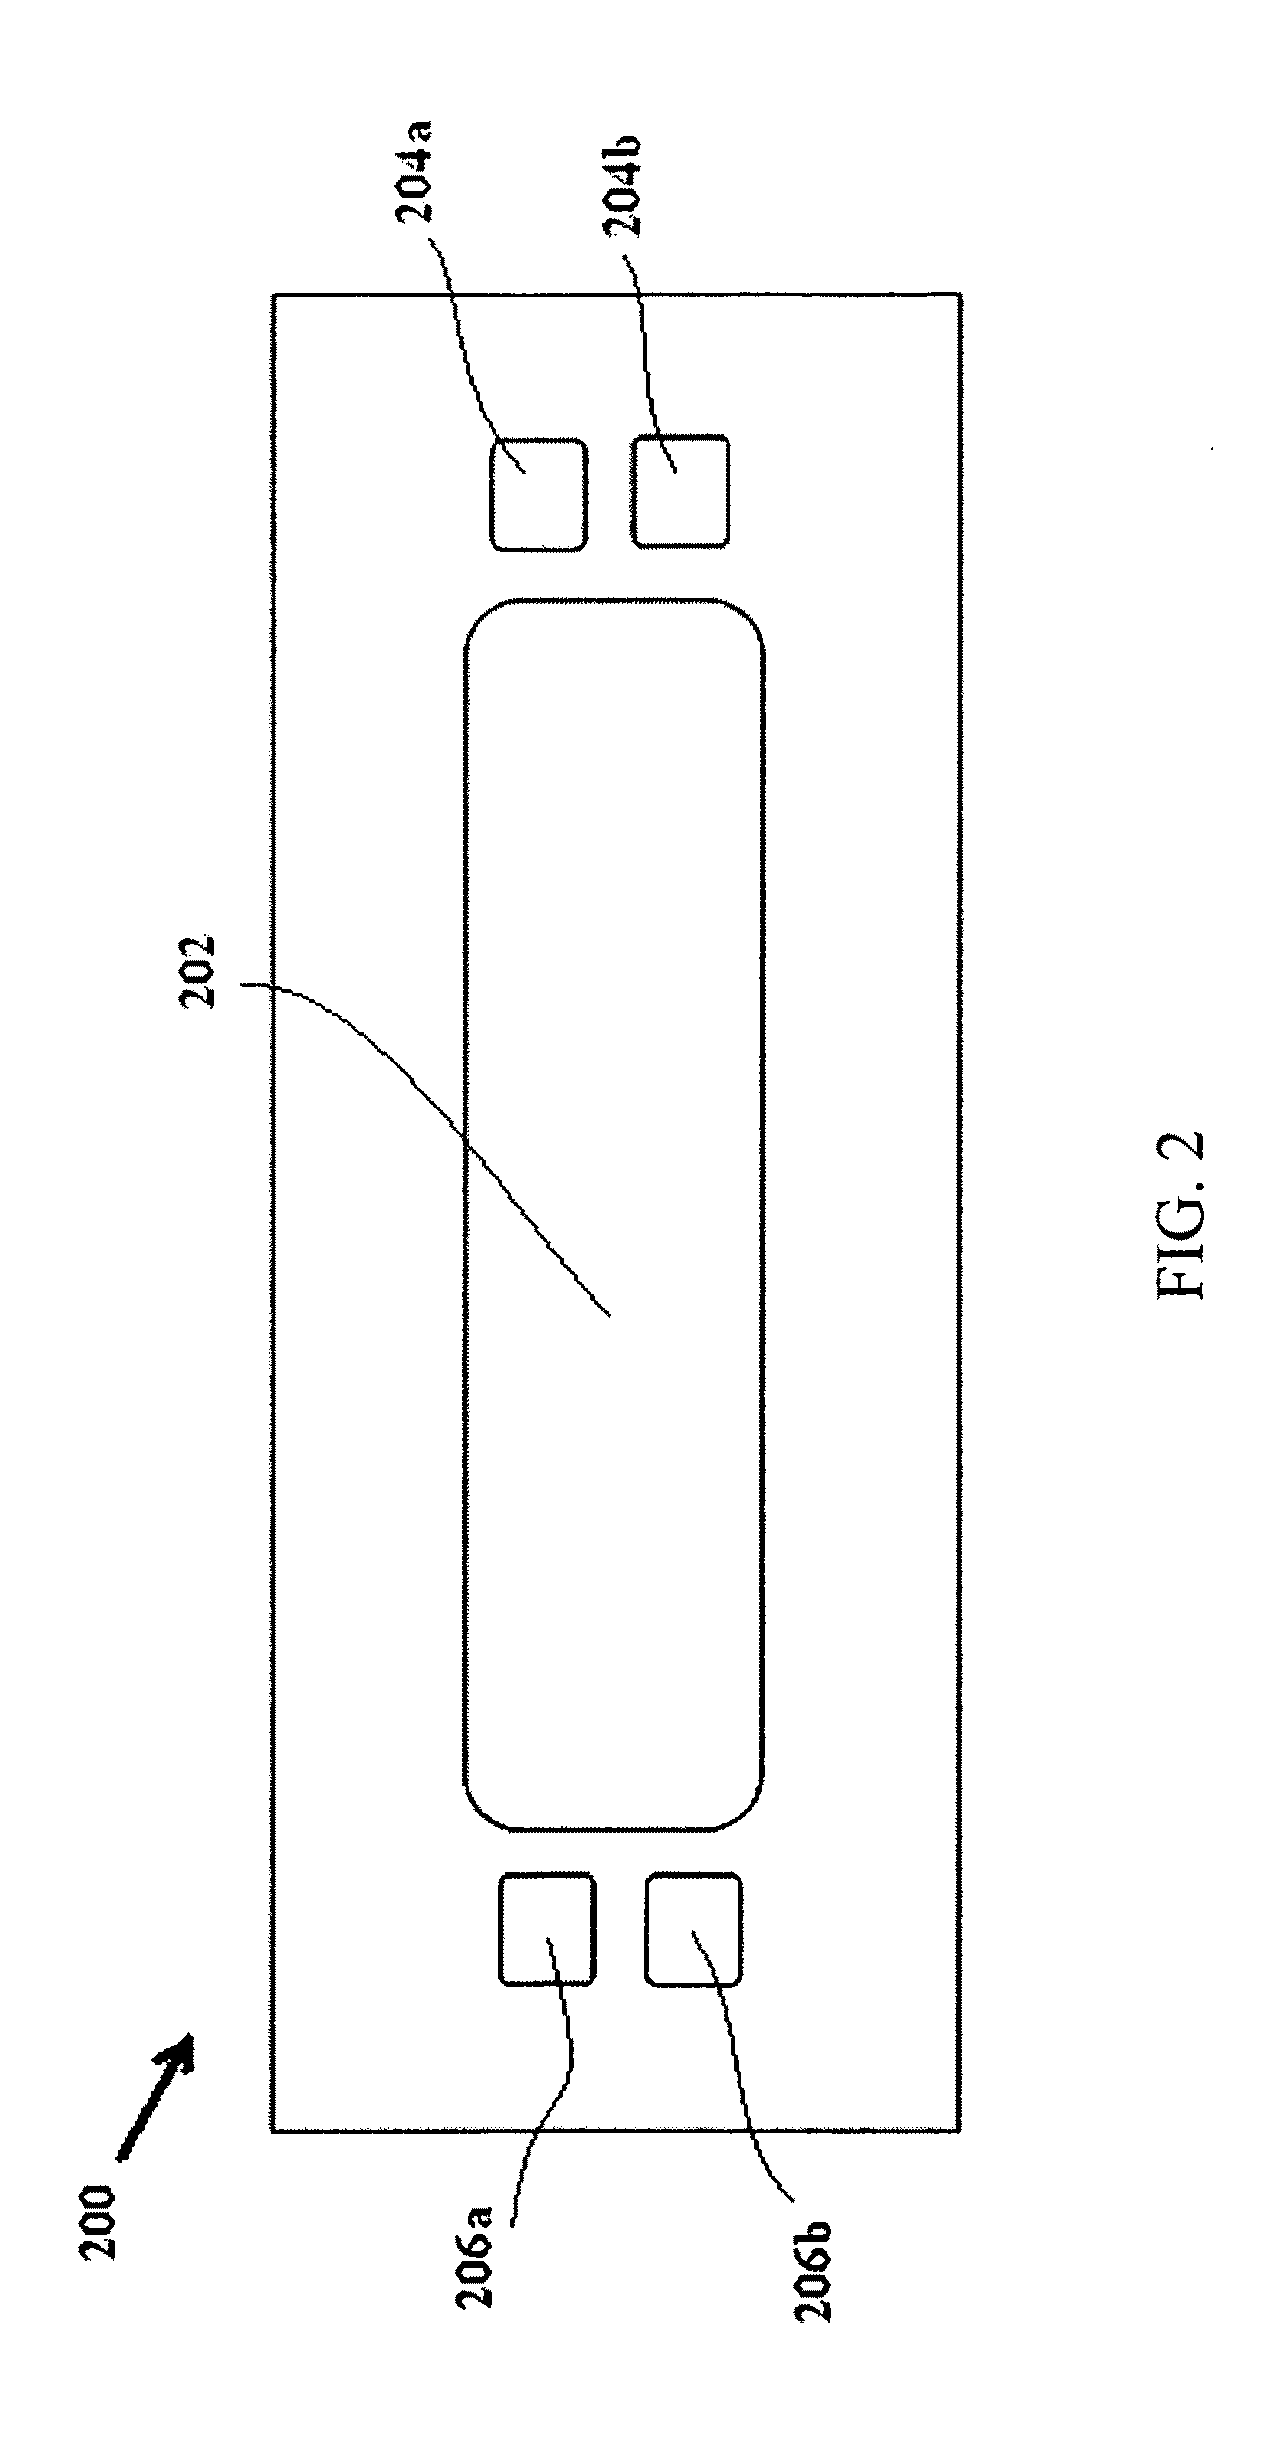 Integrated lighting system and method